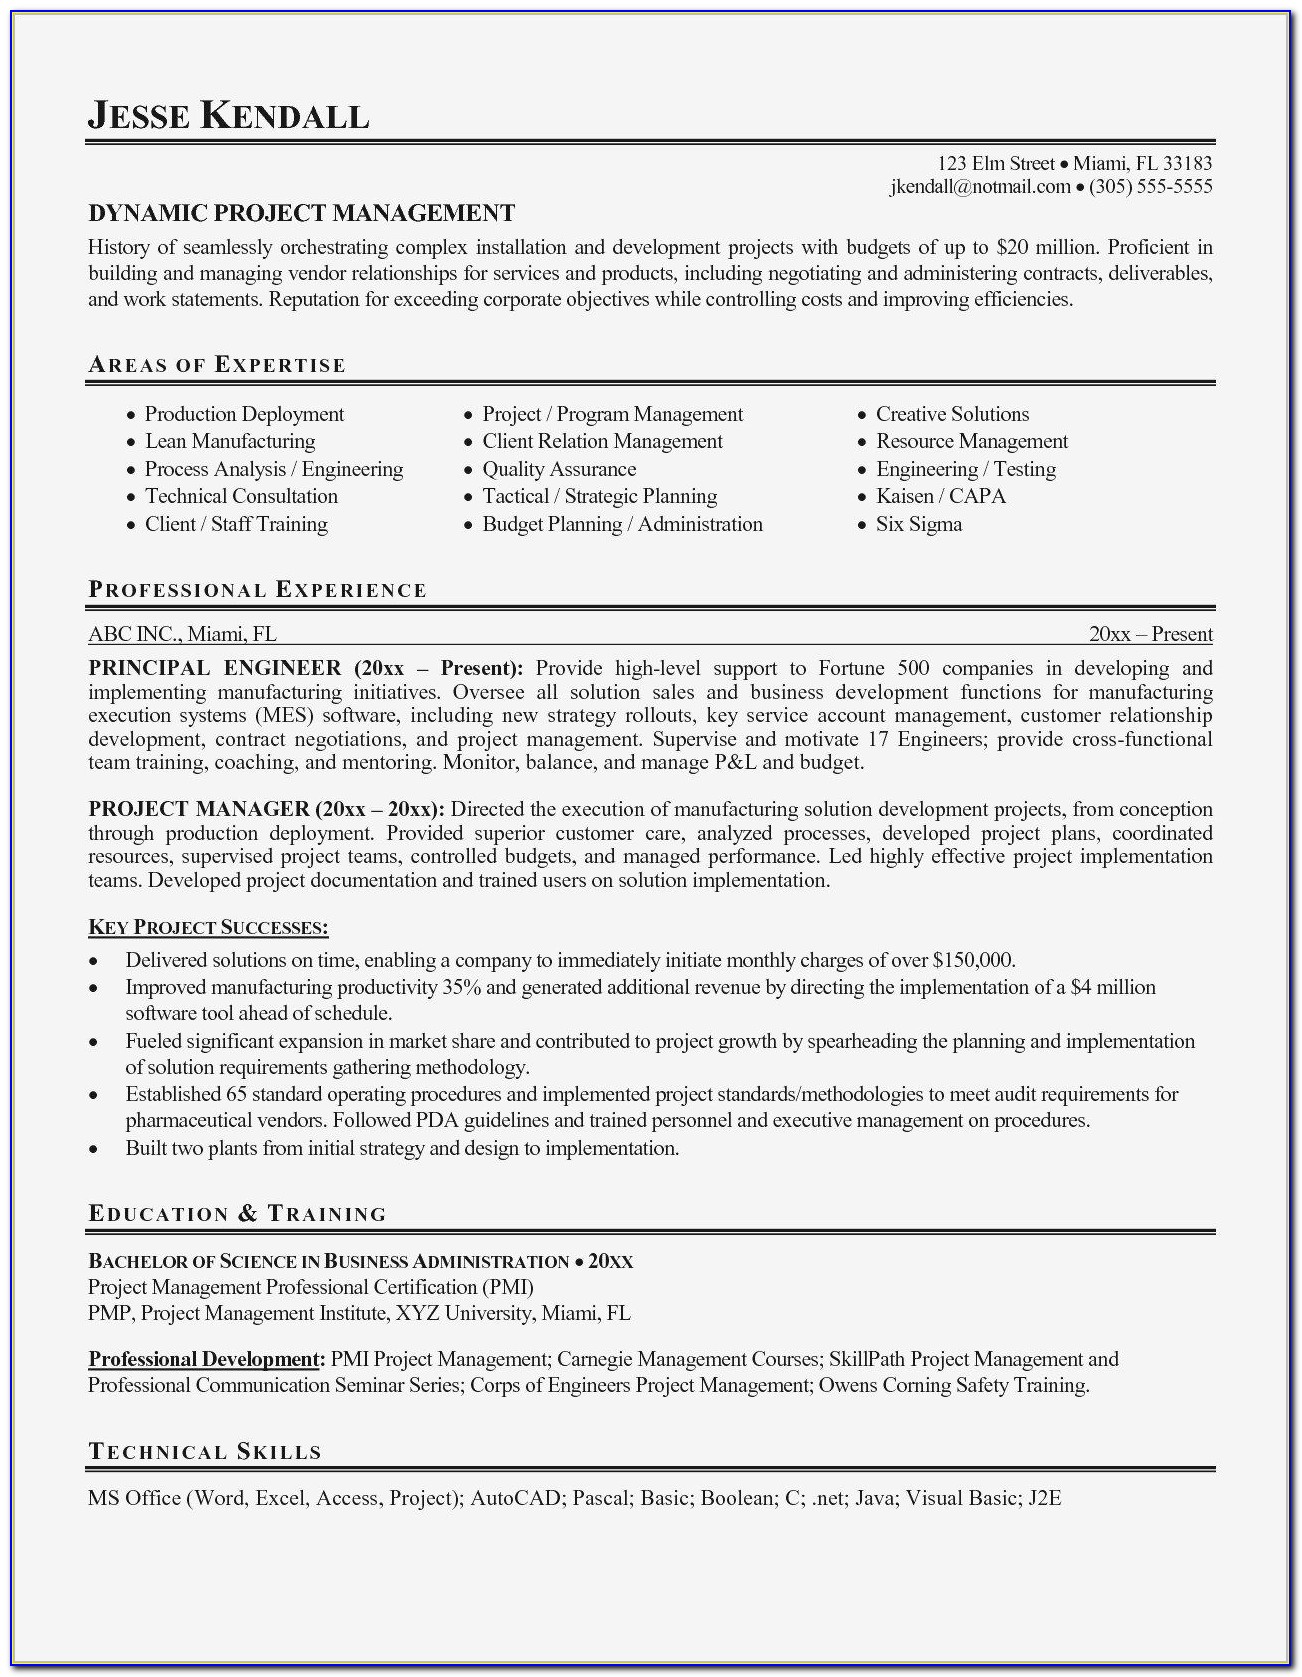 Construction Manager Resume Format